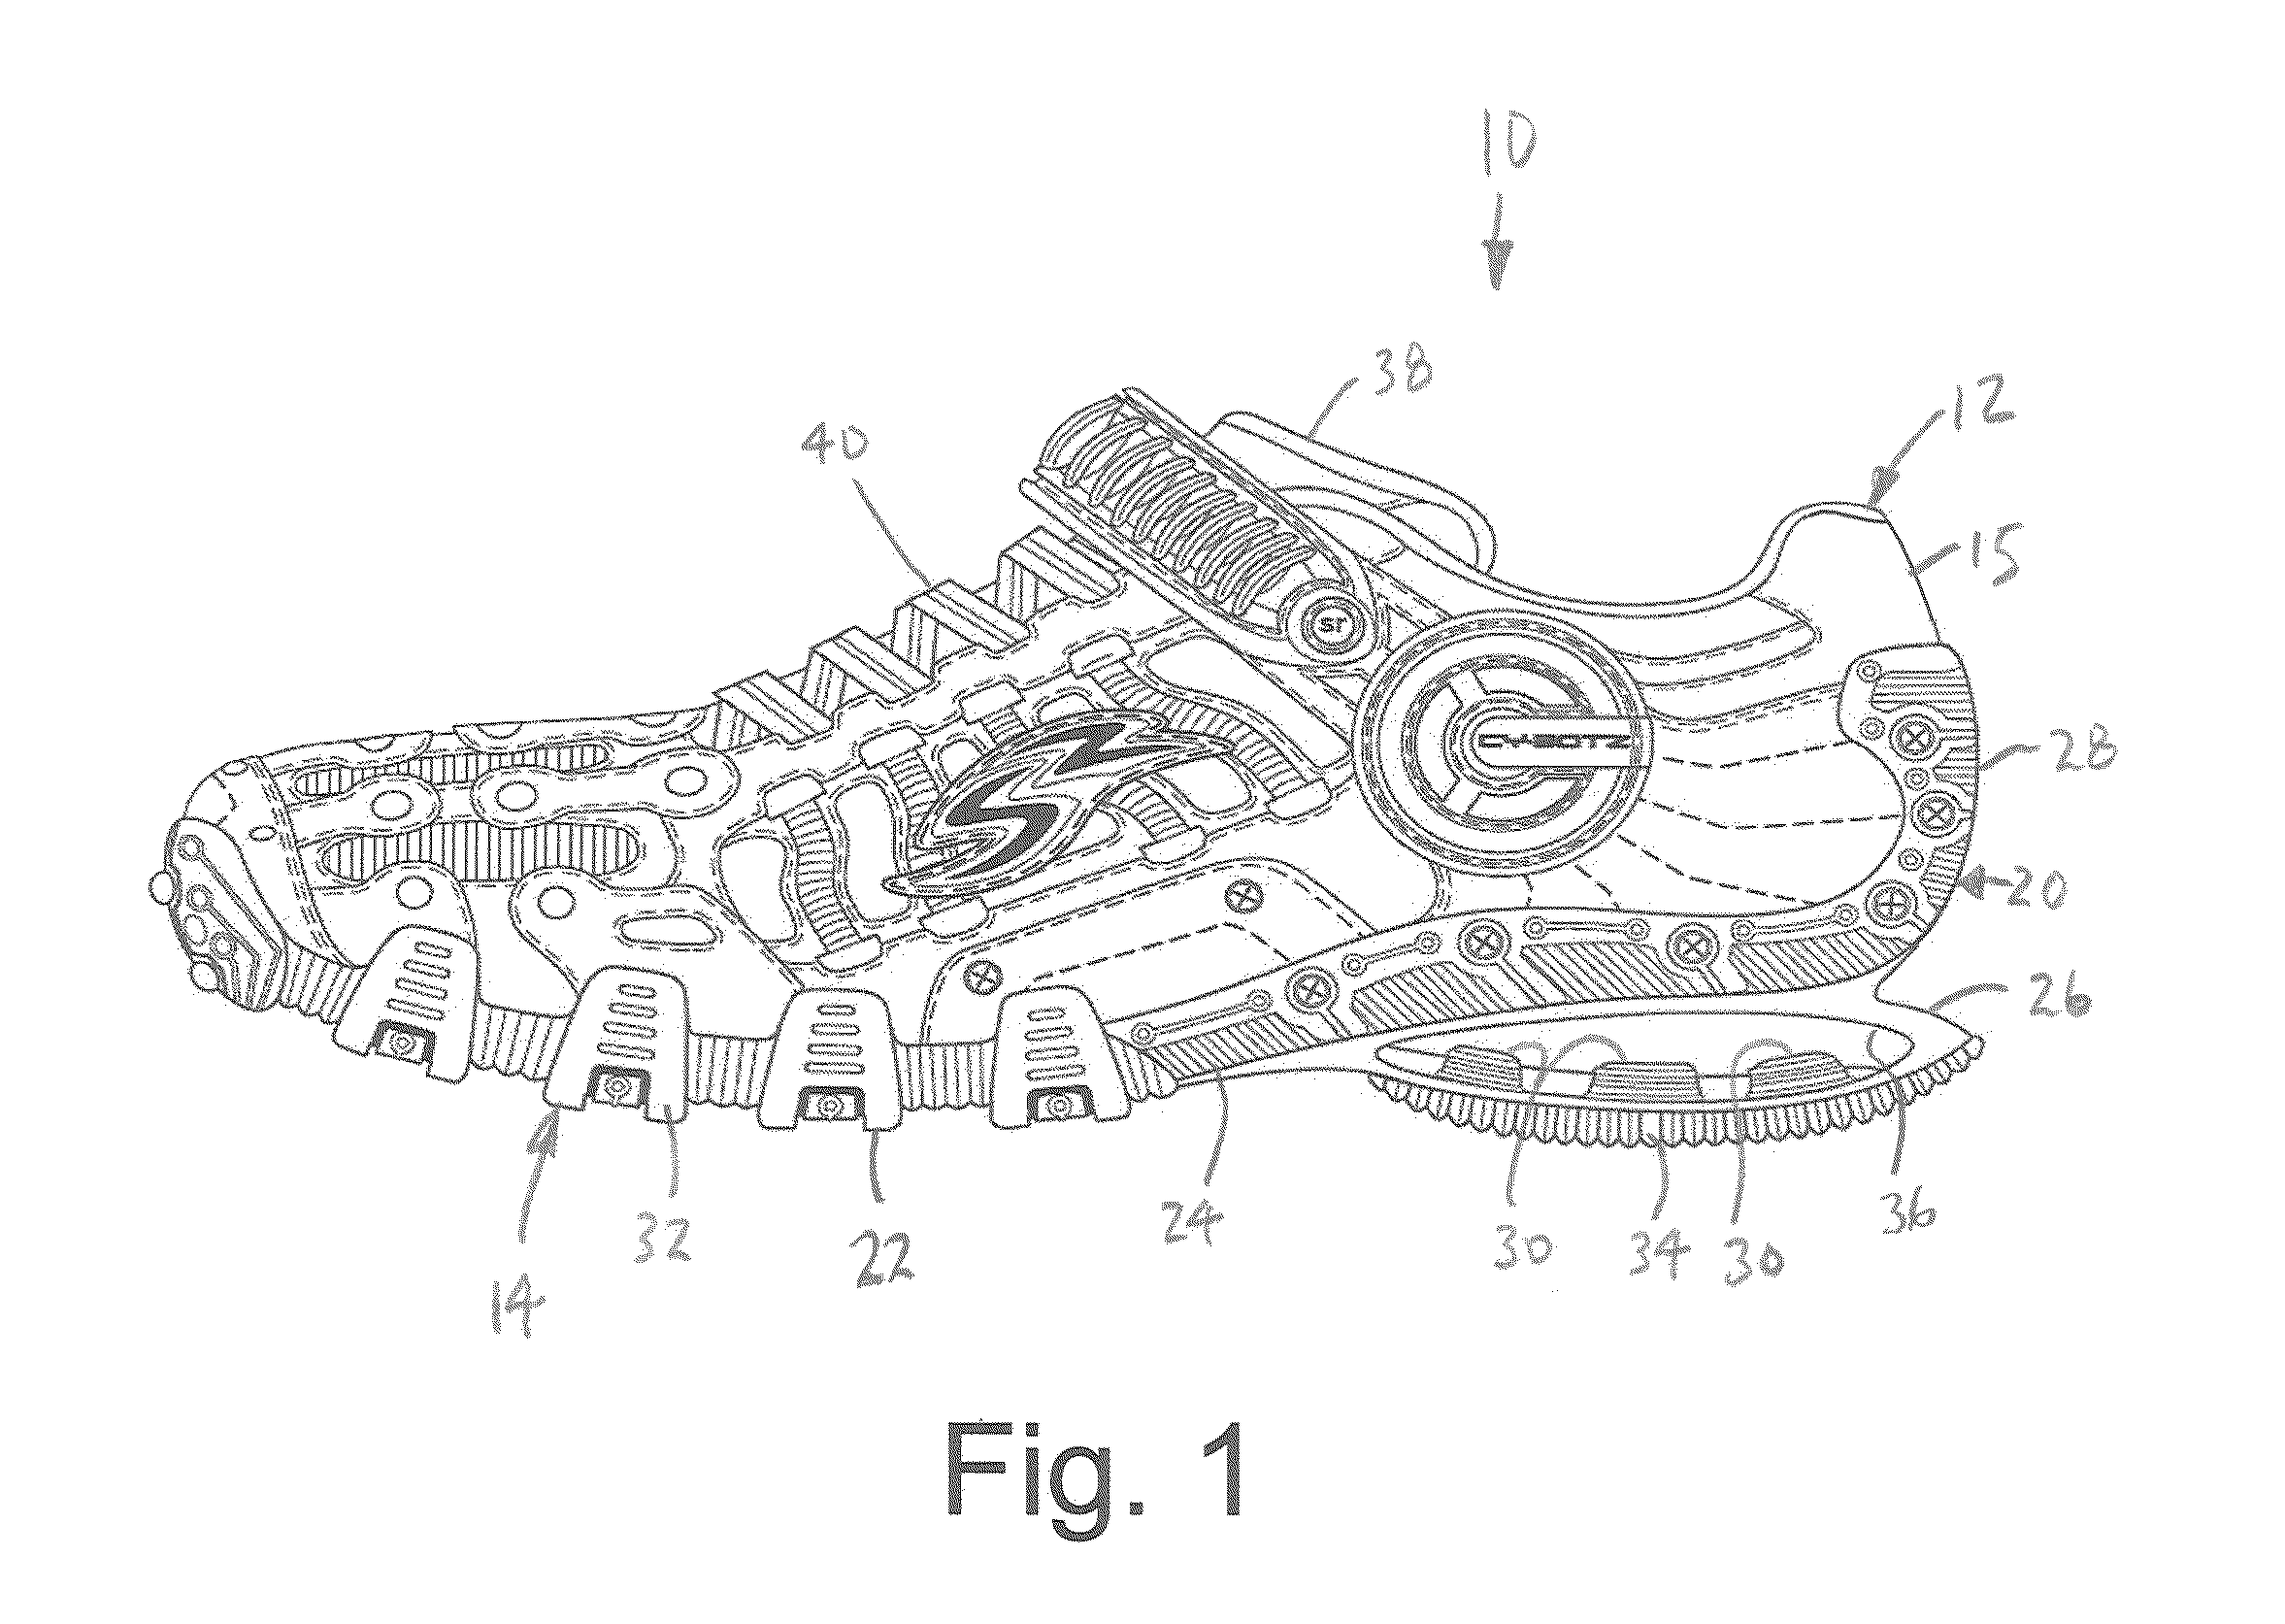 Sole assembly for article of footwear